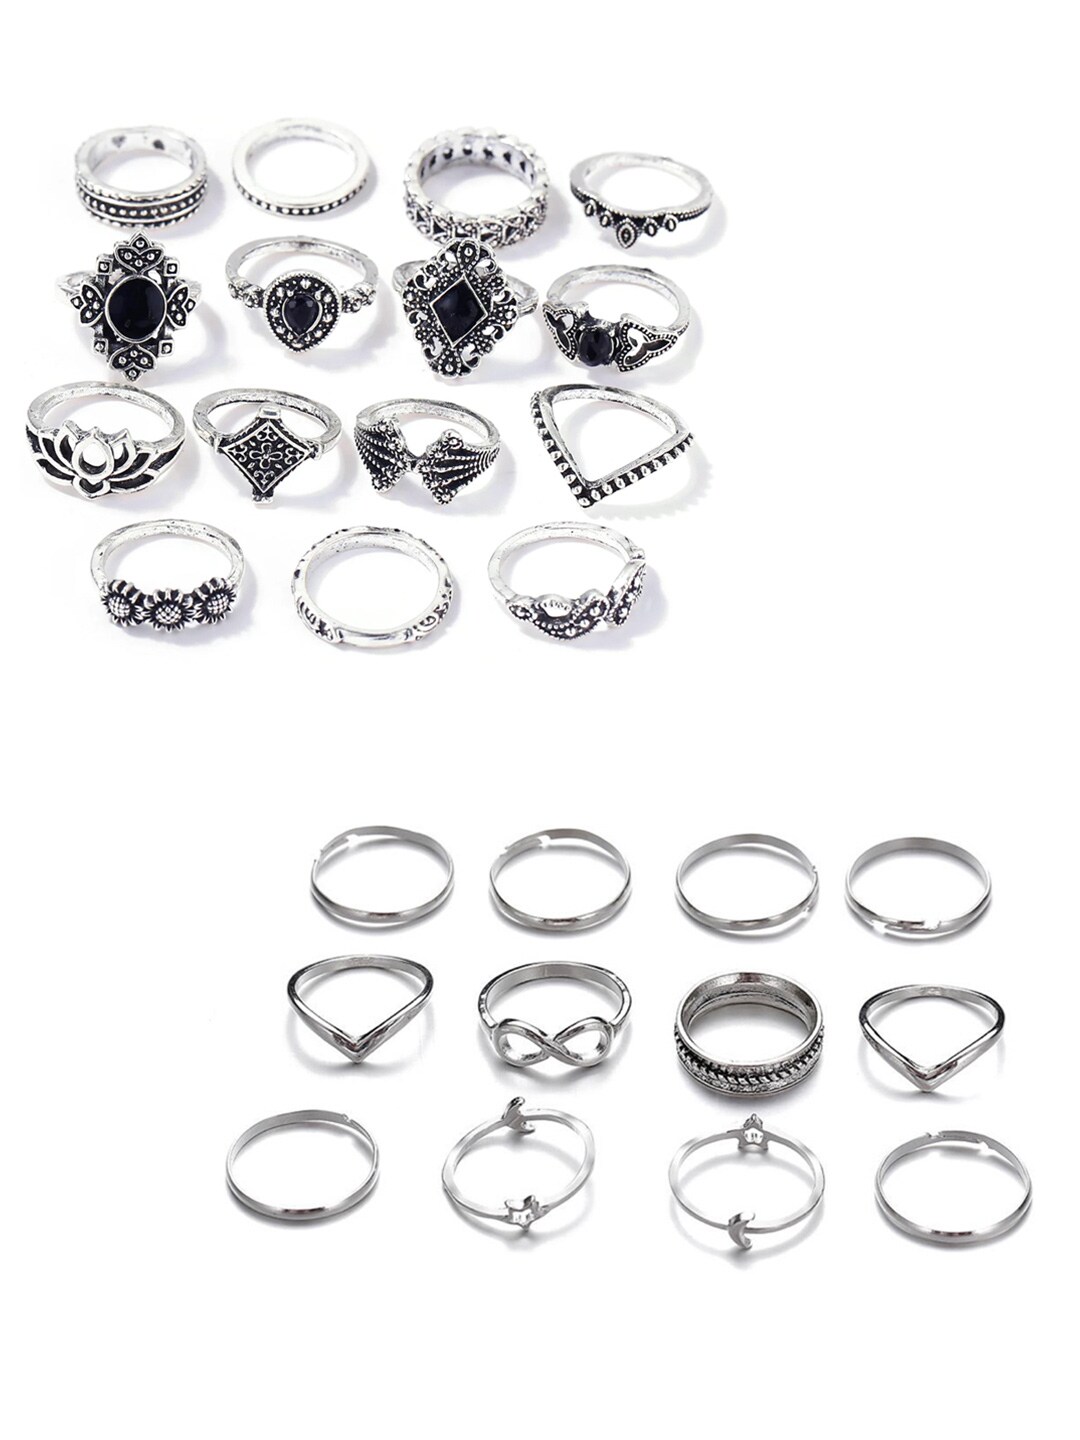 Vembley Set Of 24 Silver-Plated & Black CZ Studded Finger Ring Price in India